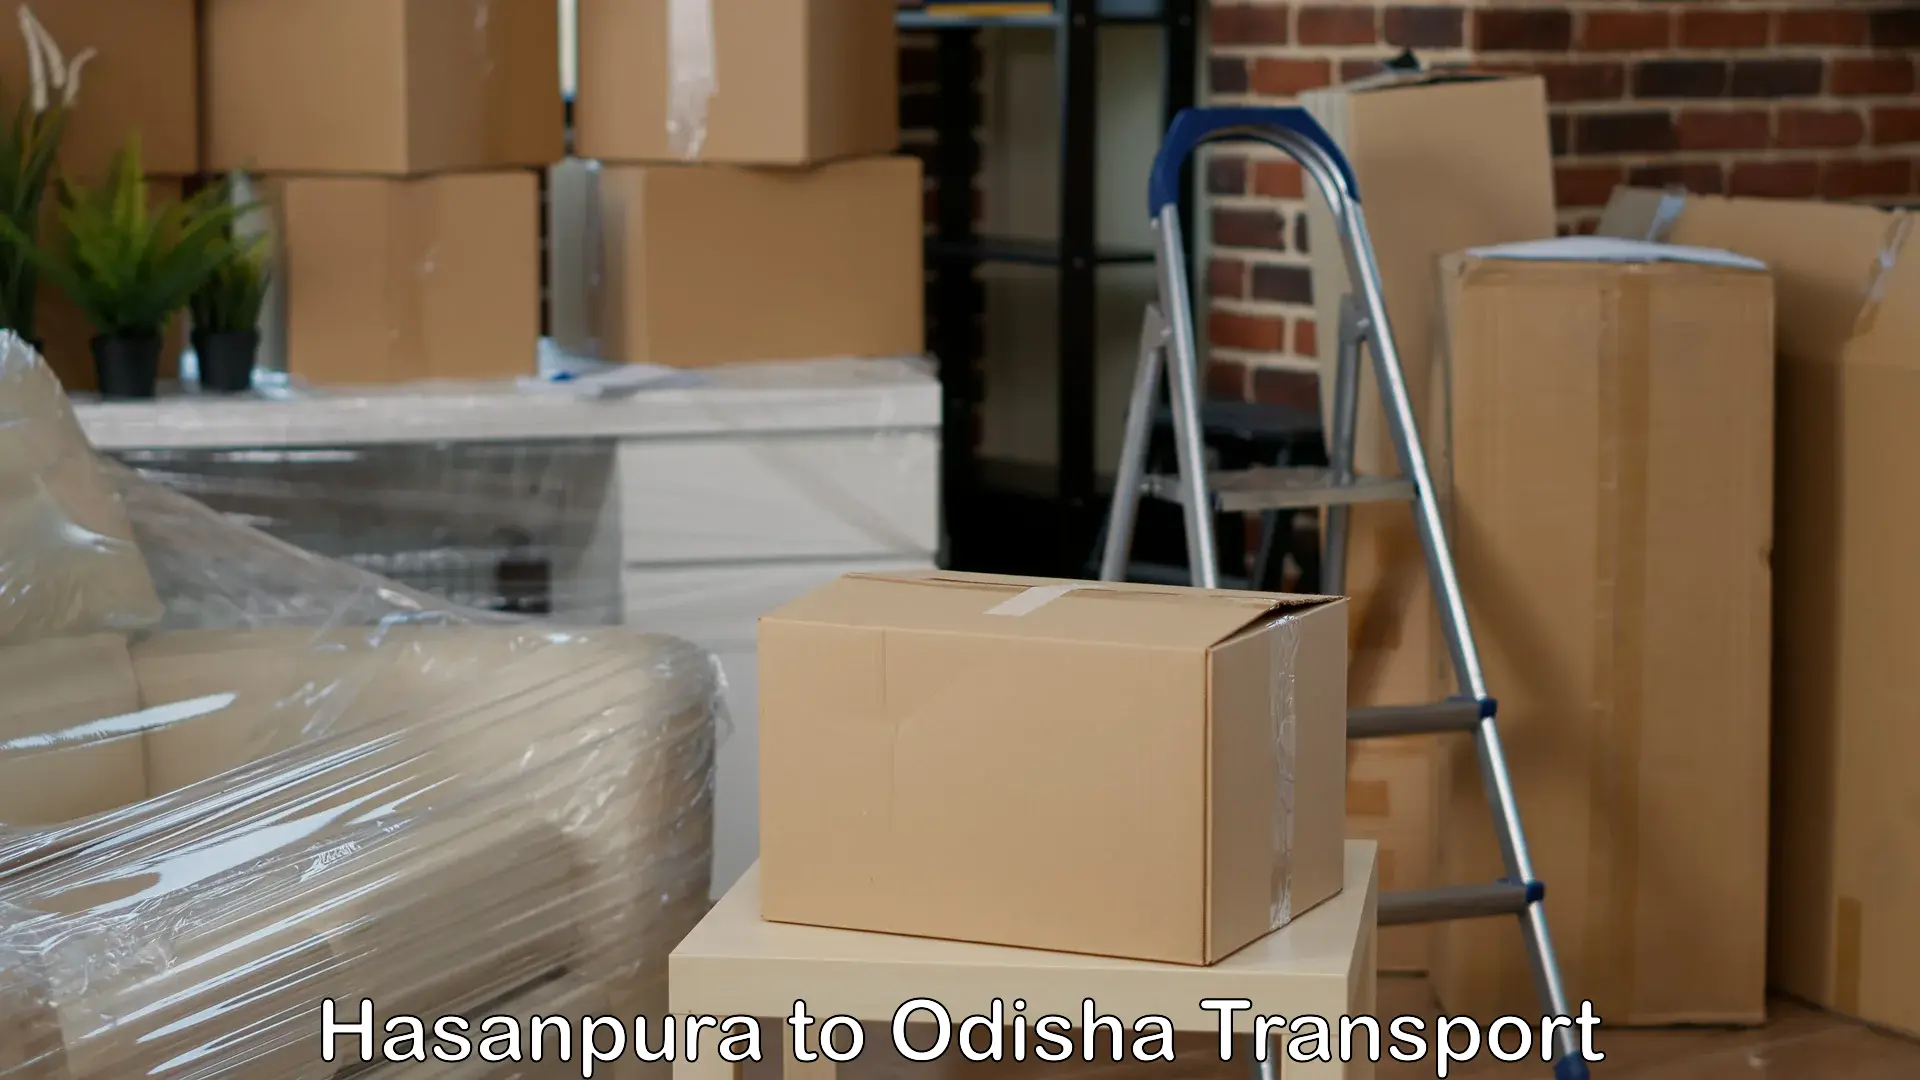 Transport bike from one state to another Hasanpura to Bhubaneswar